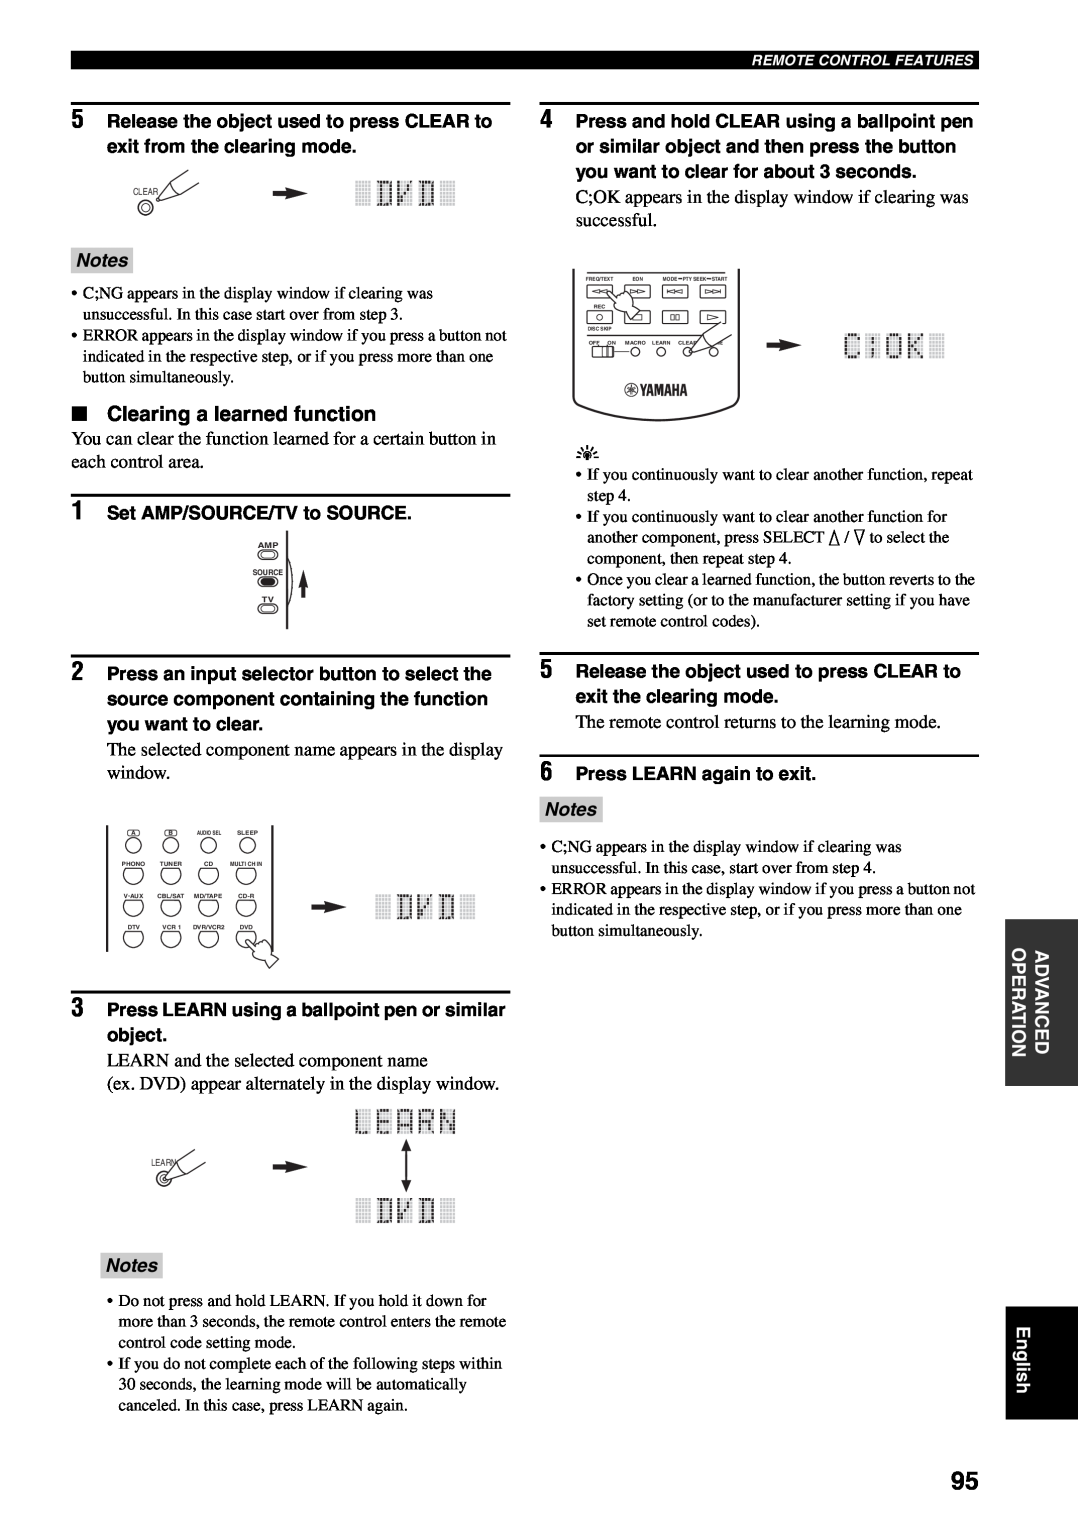 Yamaha RX-V1600 owner manual Clearing a learned function, Notes 